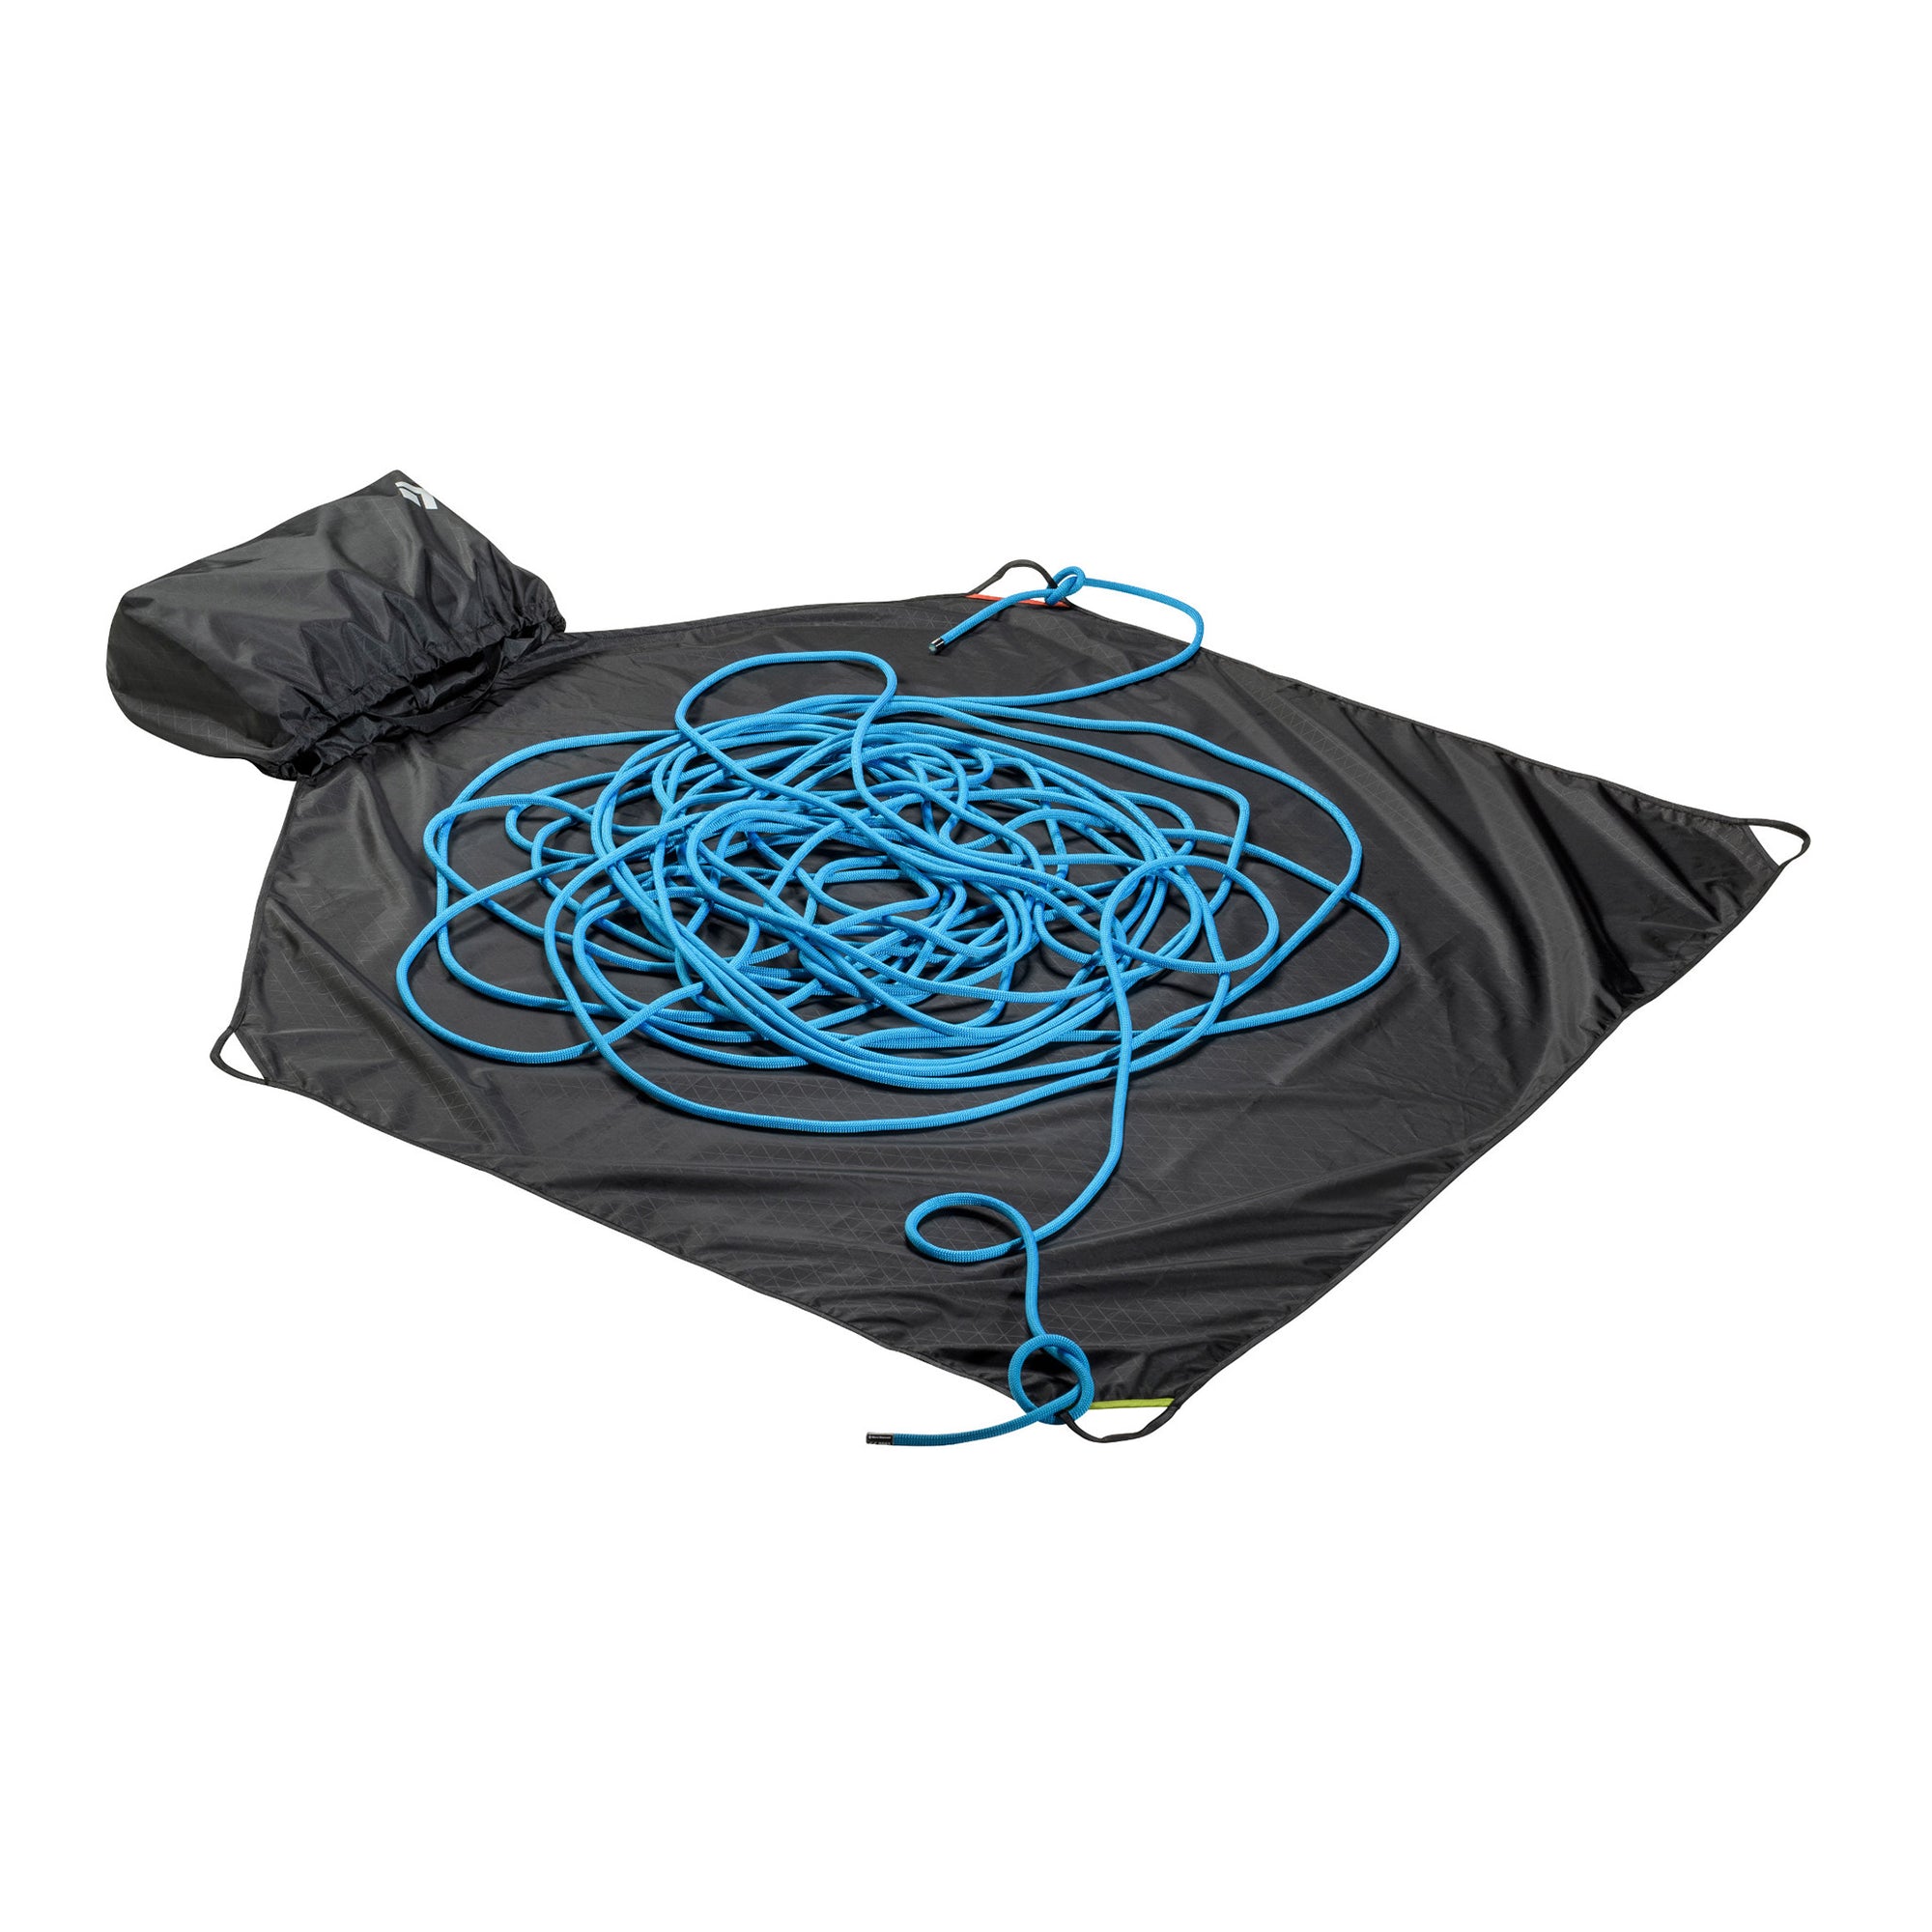 full rope burrito bag fully layed out with a blue rope flaked on top